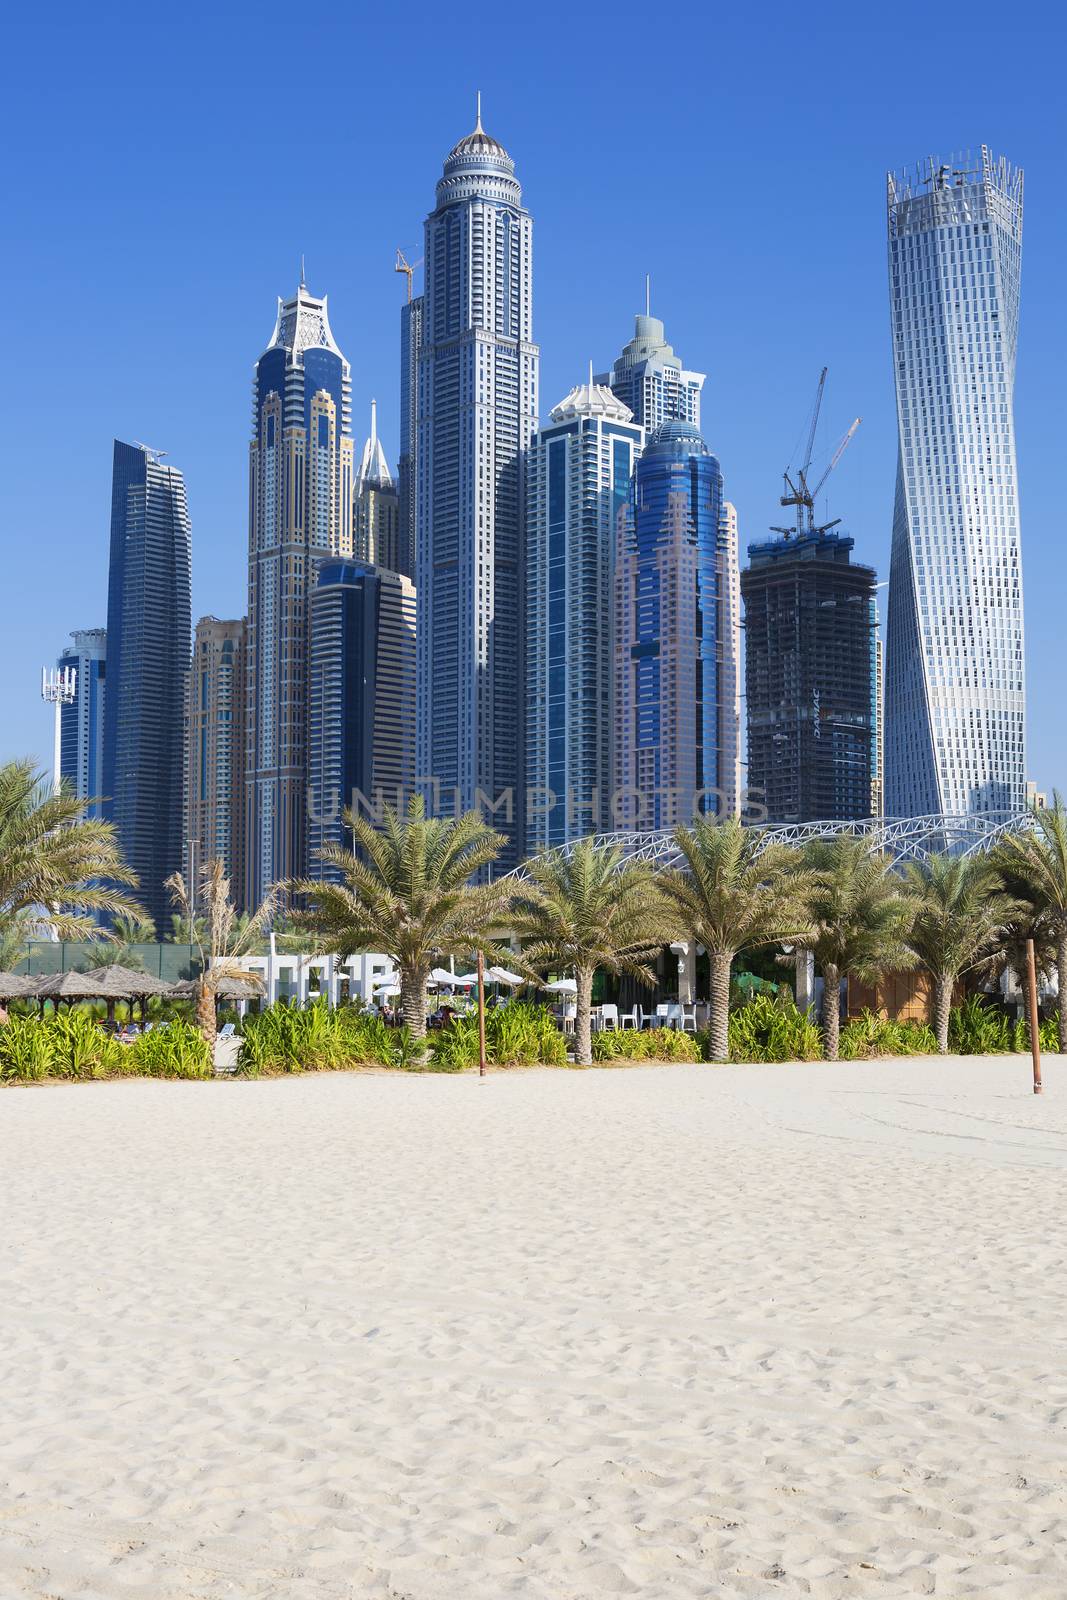 Skyscrapers and jumeirah beach by vwalakte